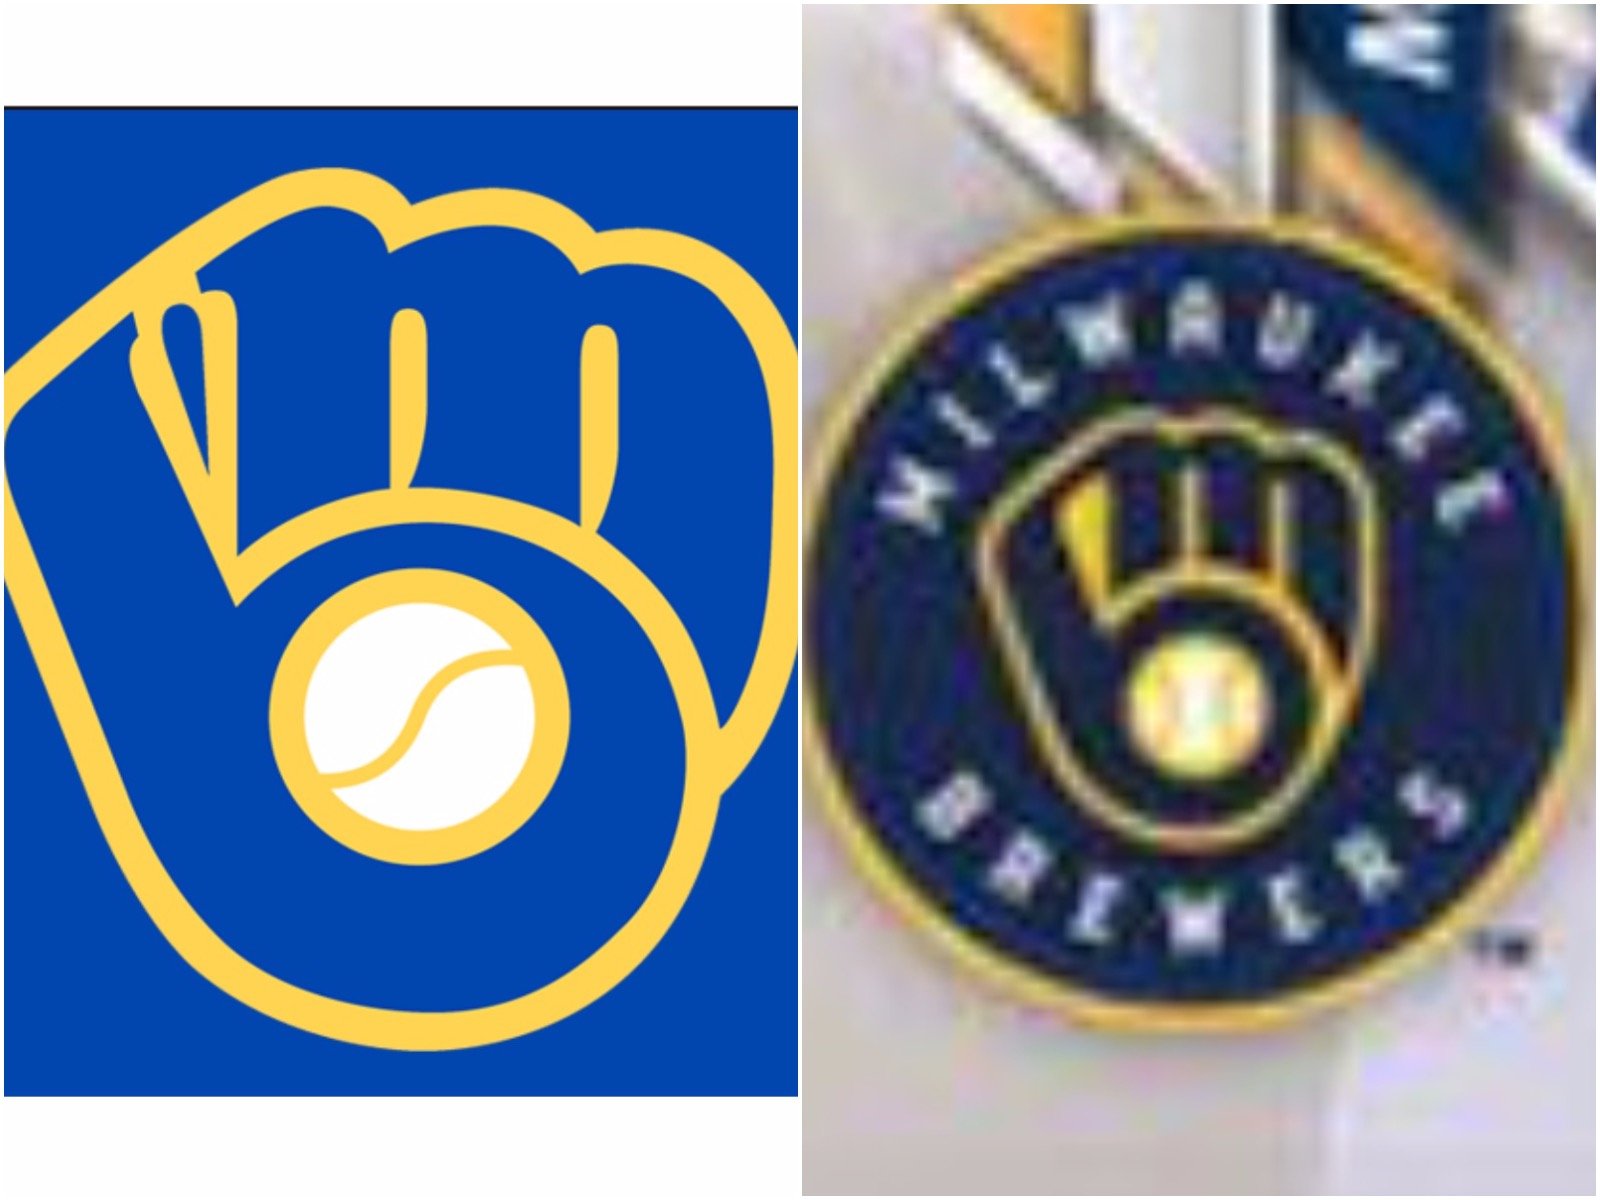 Brewers to have new look in 2020